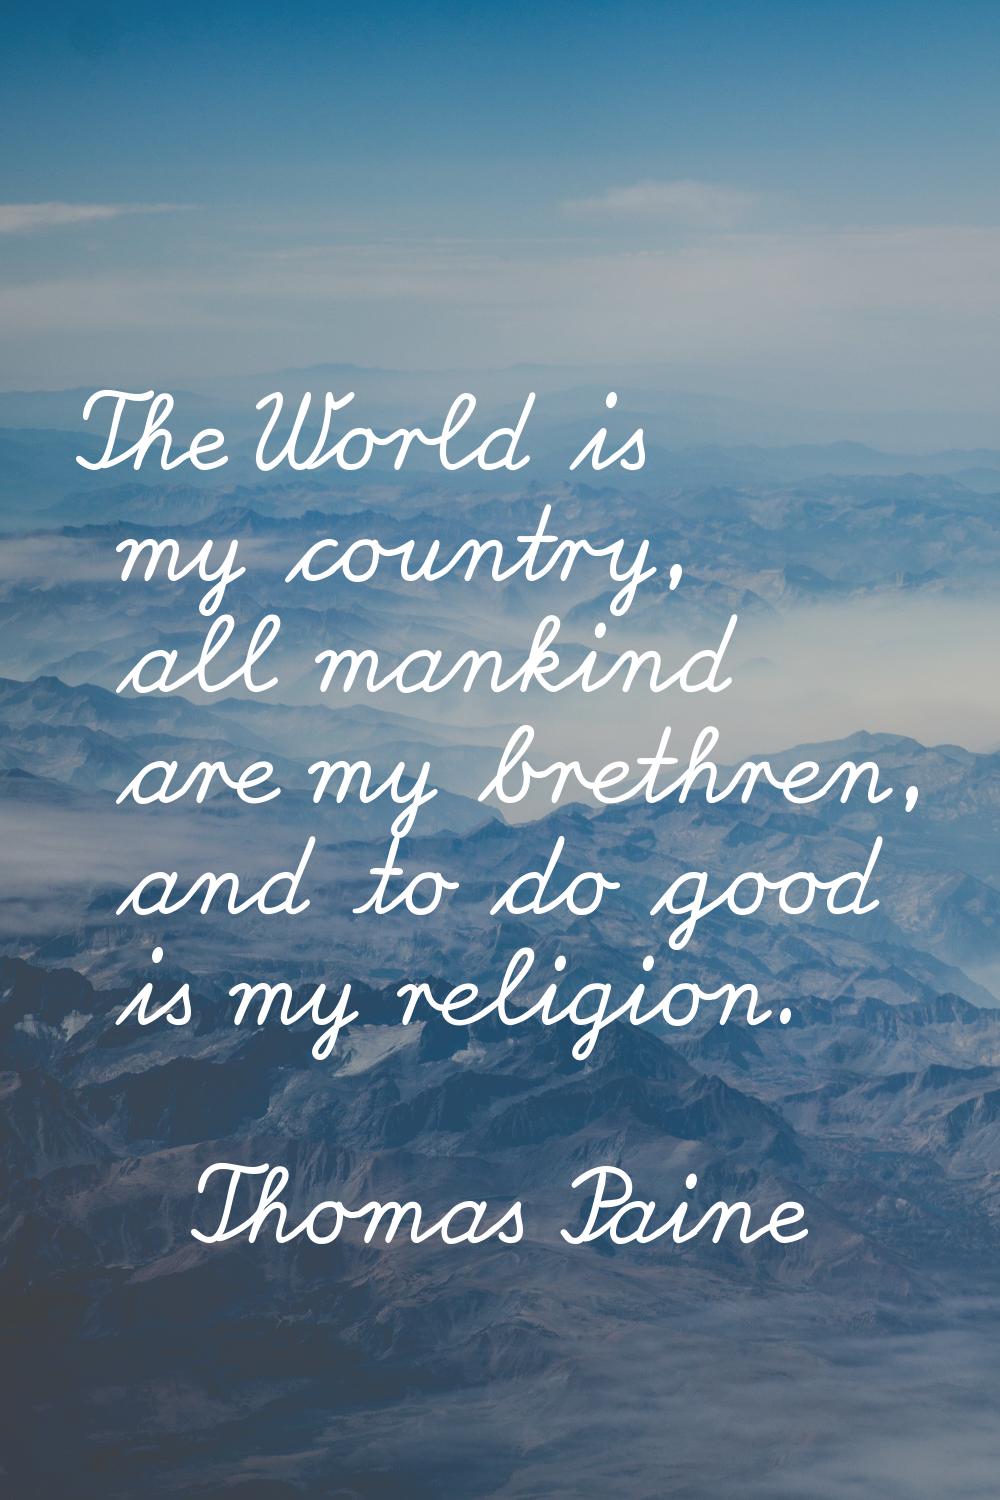 The World is my country, all mankind are my brethren, and to do good is my religion.